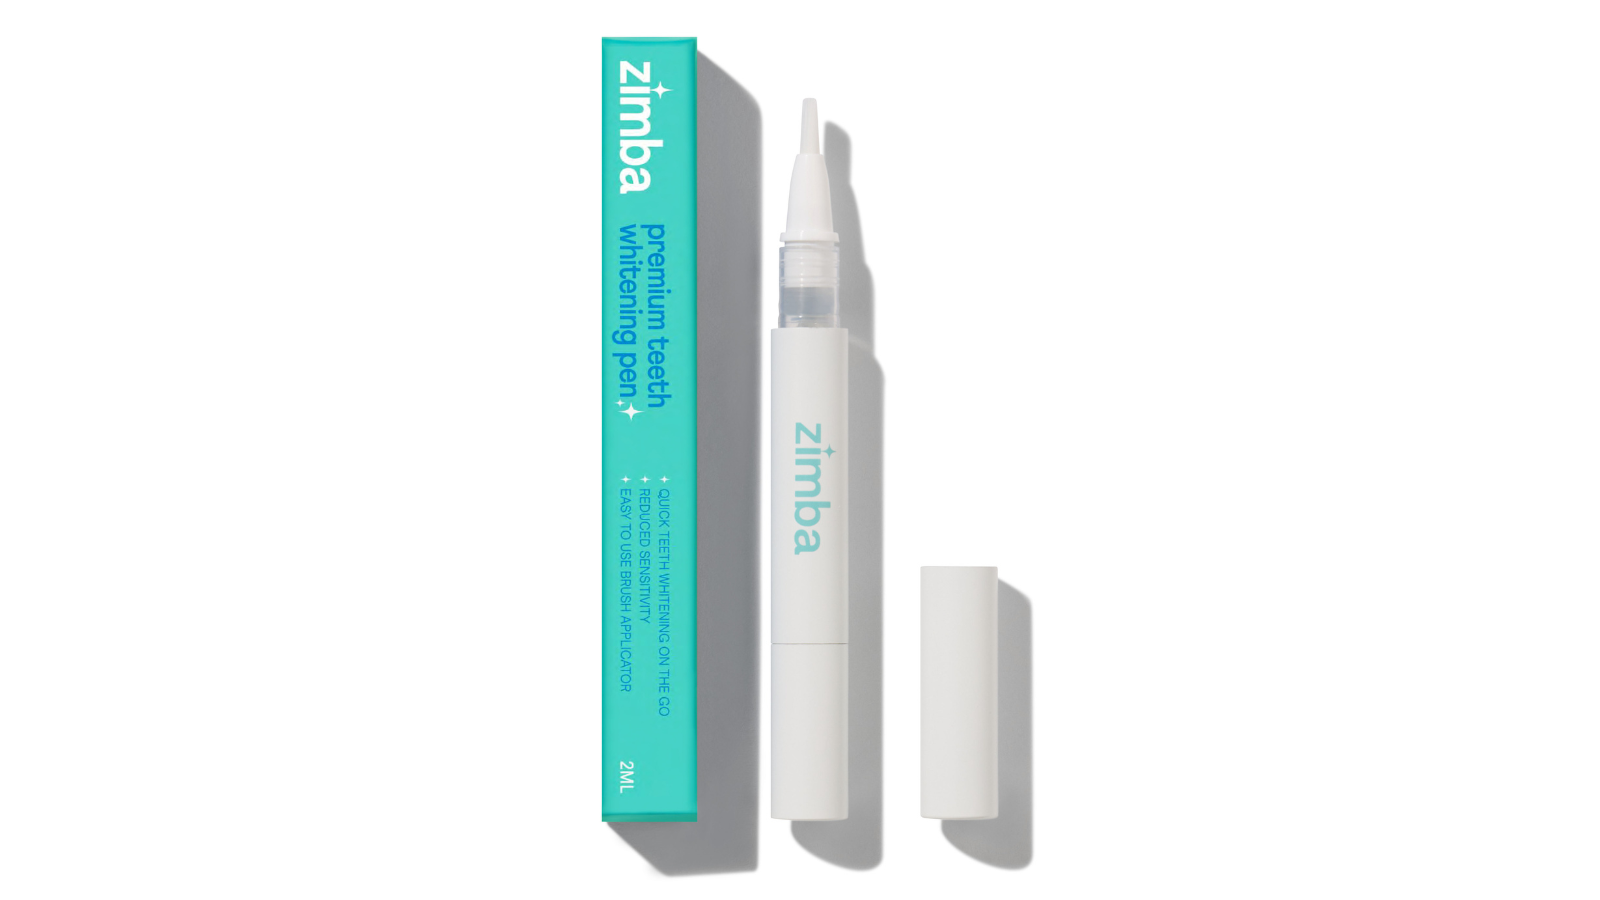 What Are Teeth Whitening Pens?